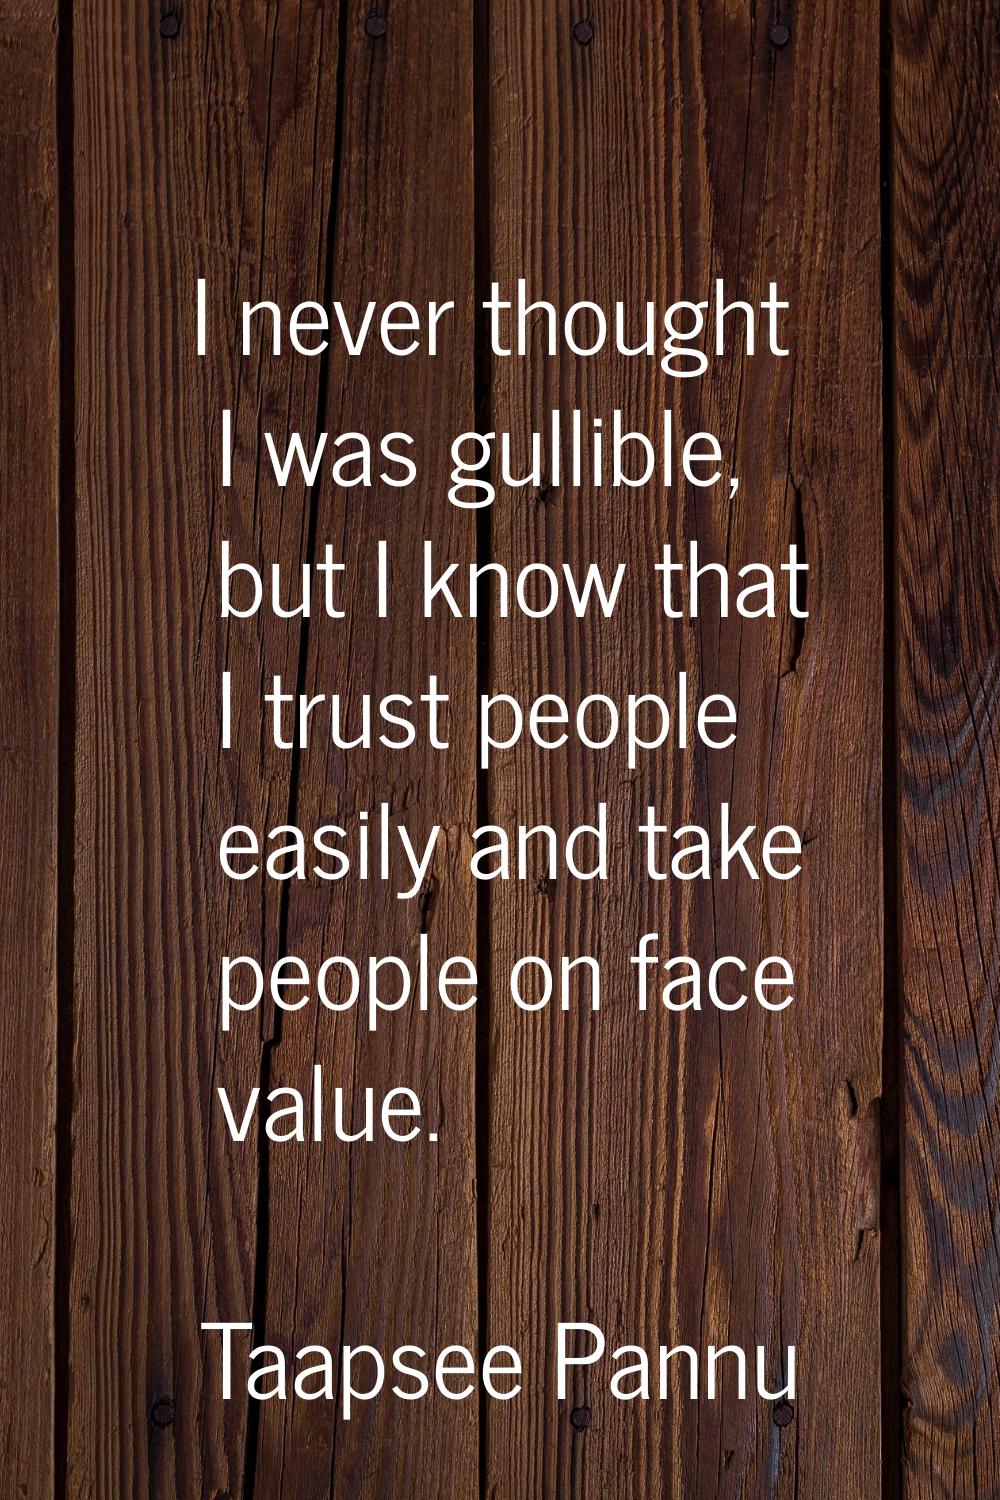 I never thought I was gullible, but I know that I trust people easily and take people on face value